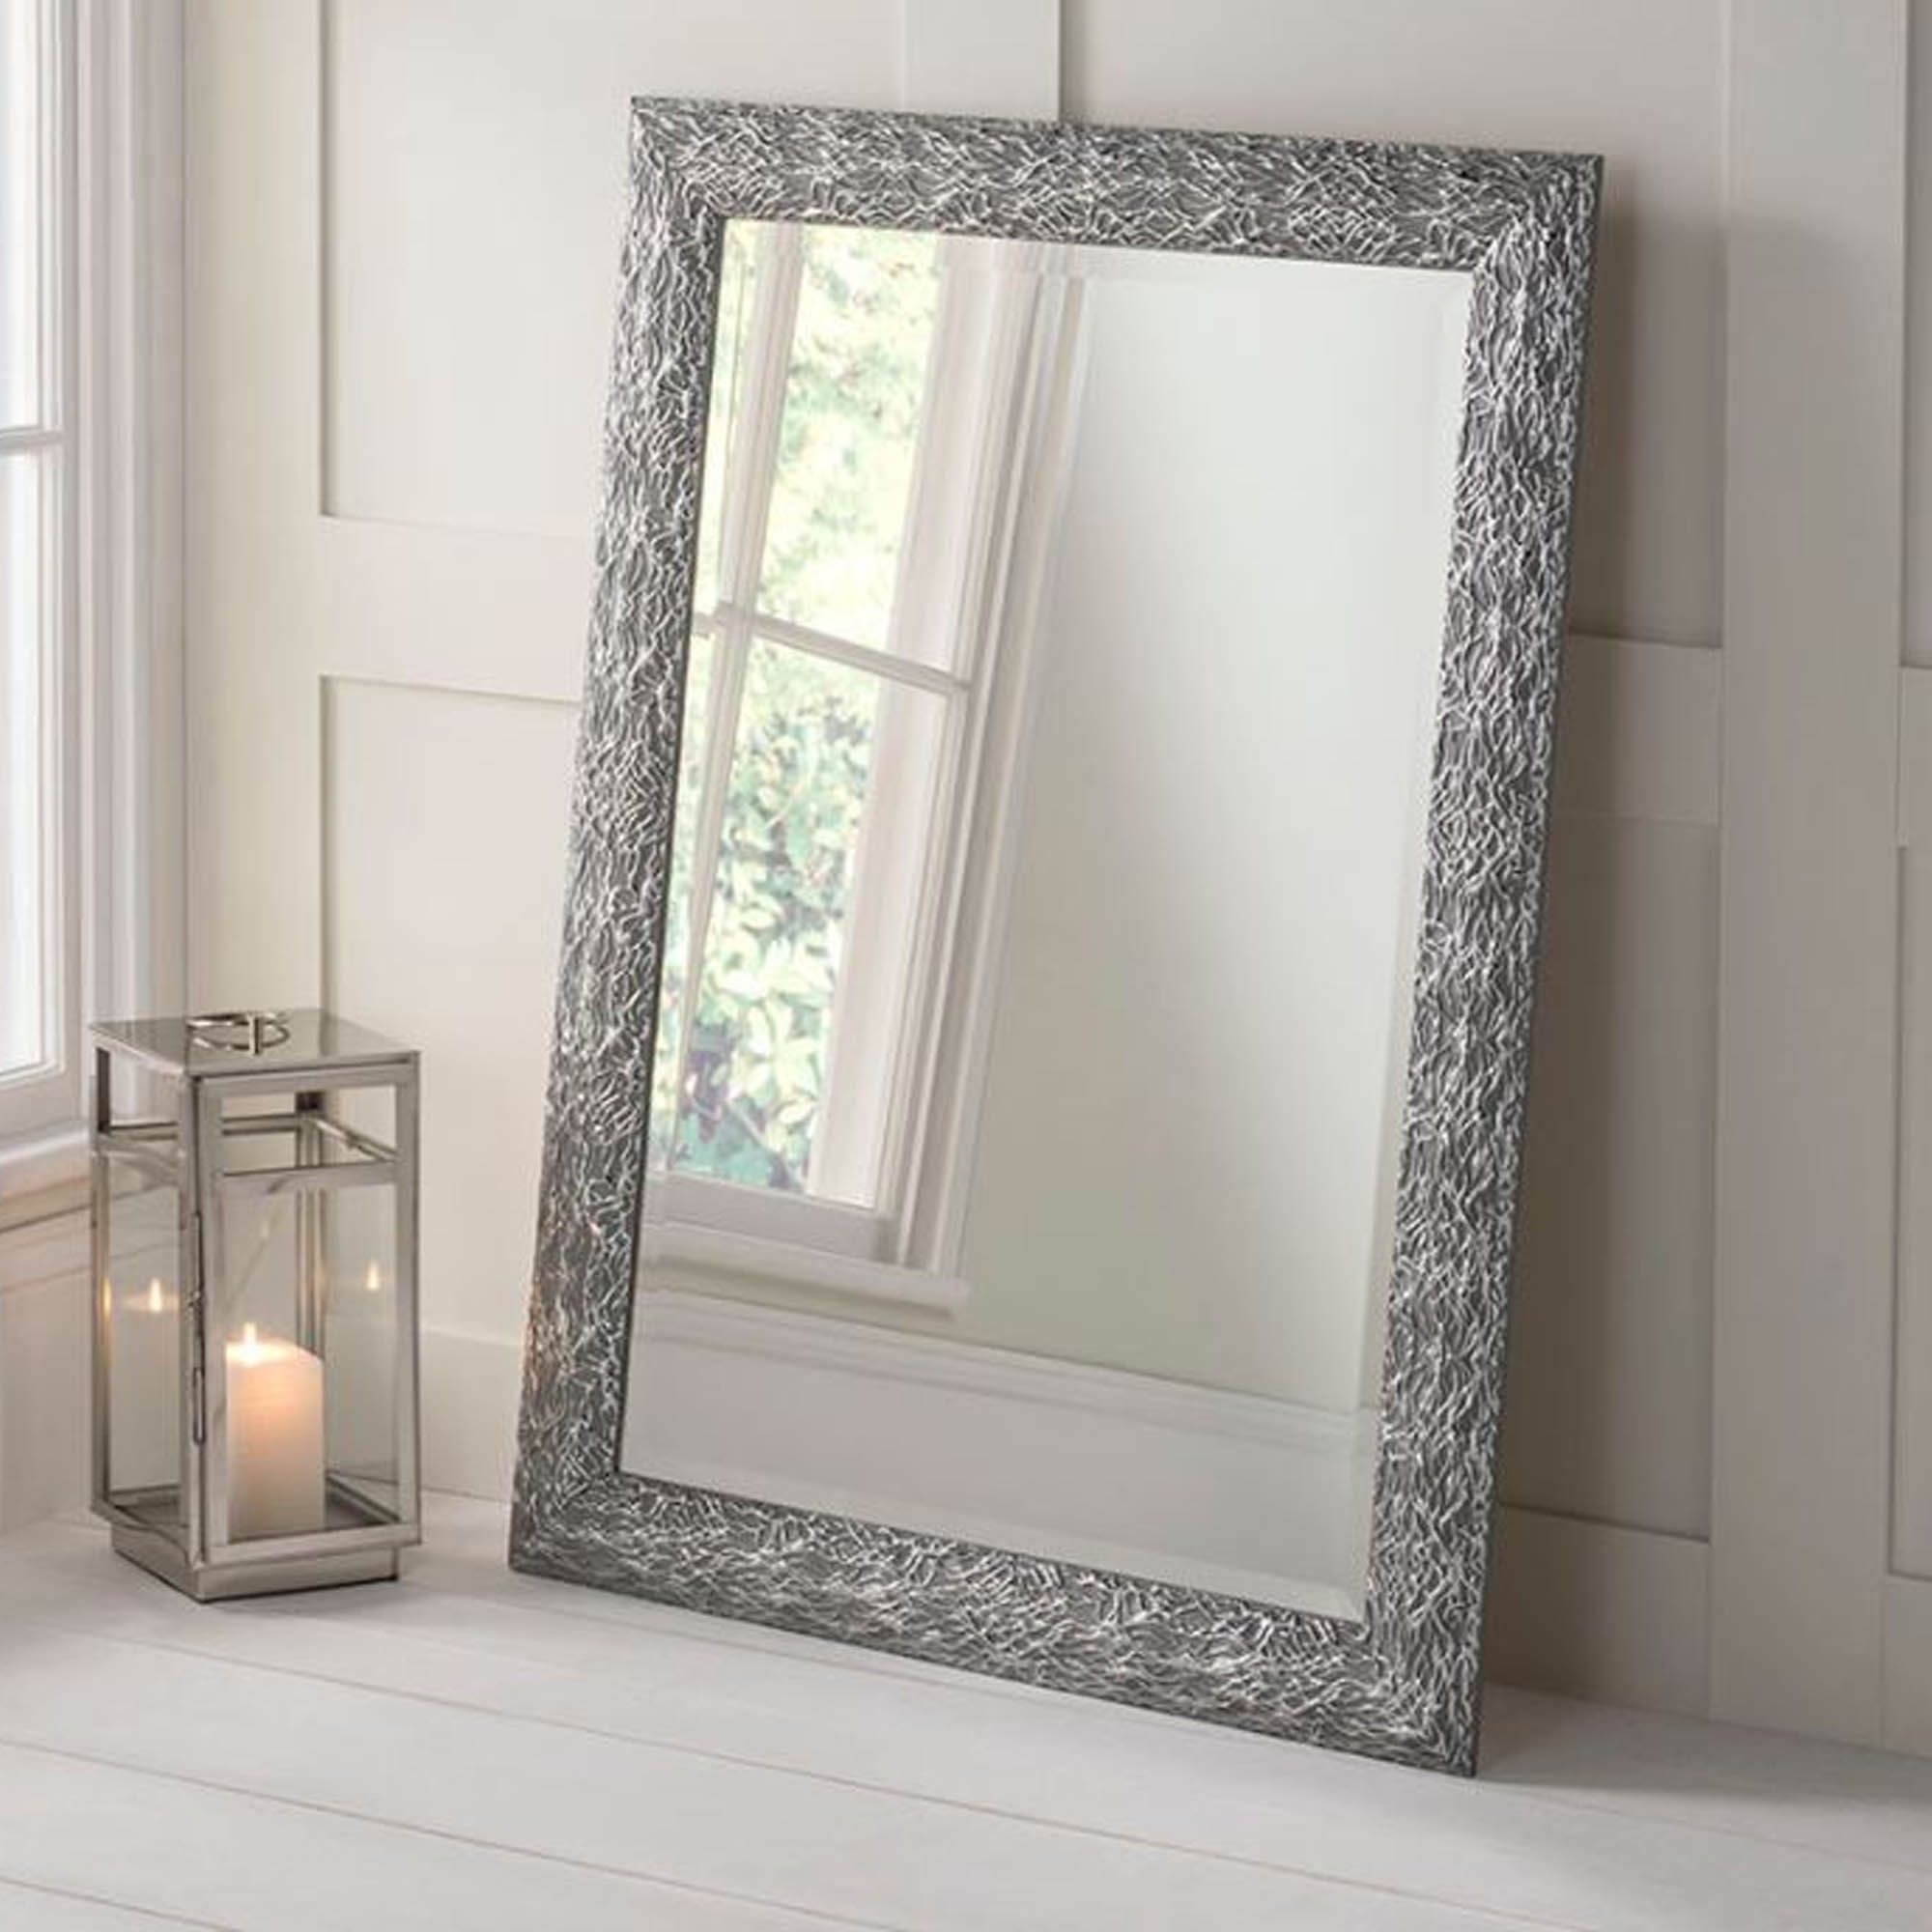 Detailed Rectangular Grey And Silver Wall Mirror | Hd365 Within Steel Gray Wall Mirrors (View 2 of 15)